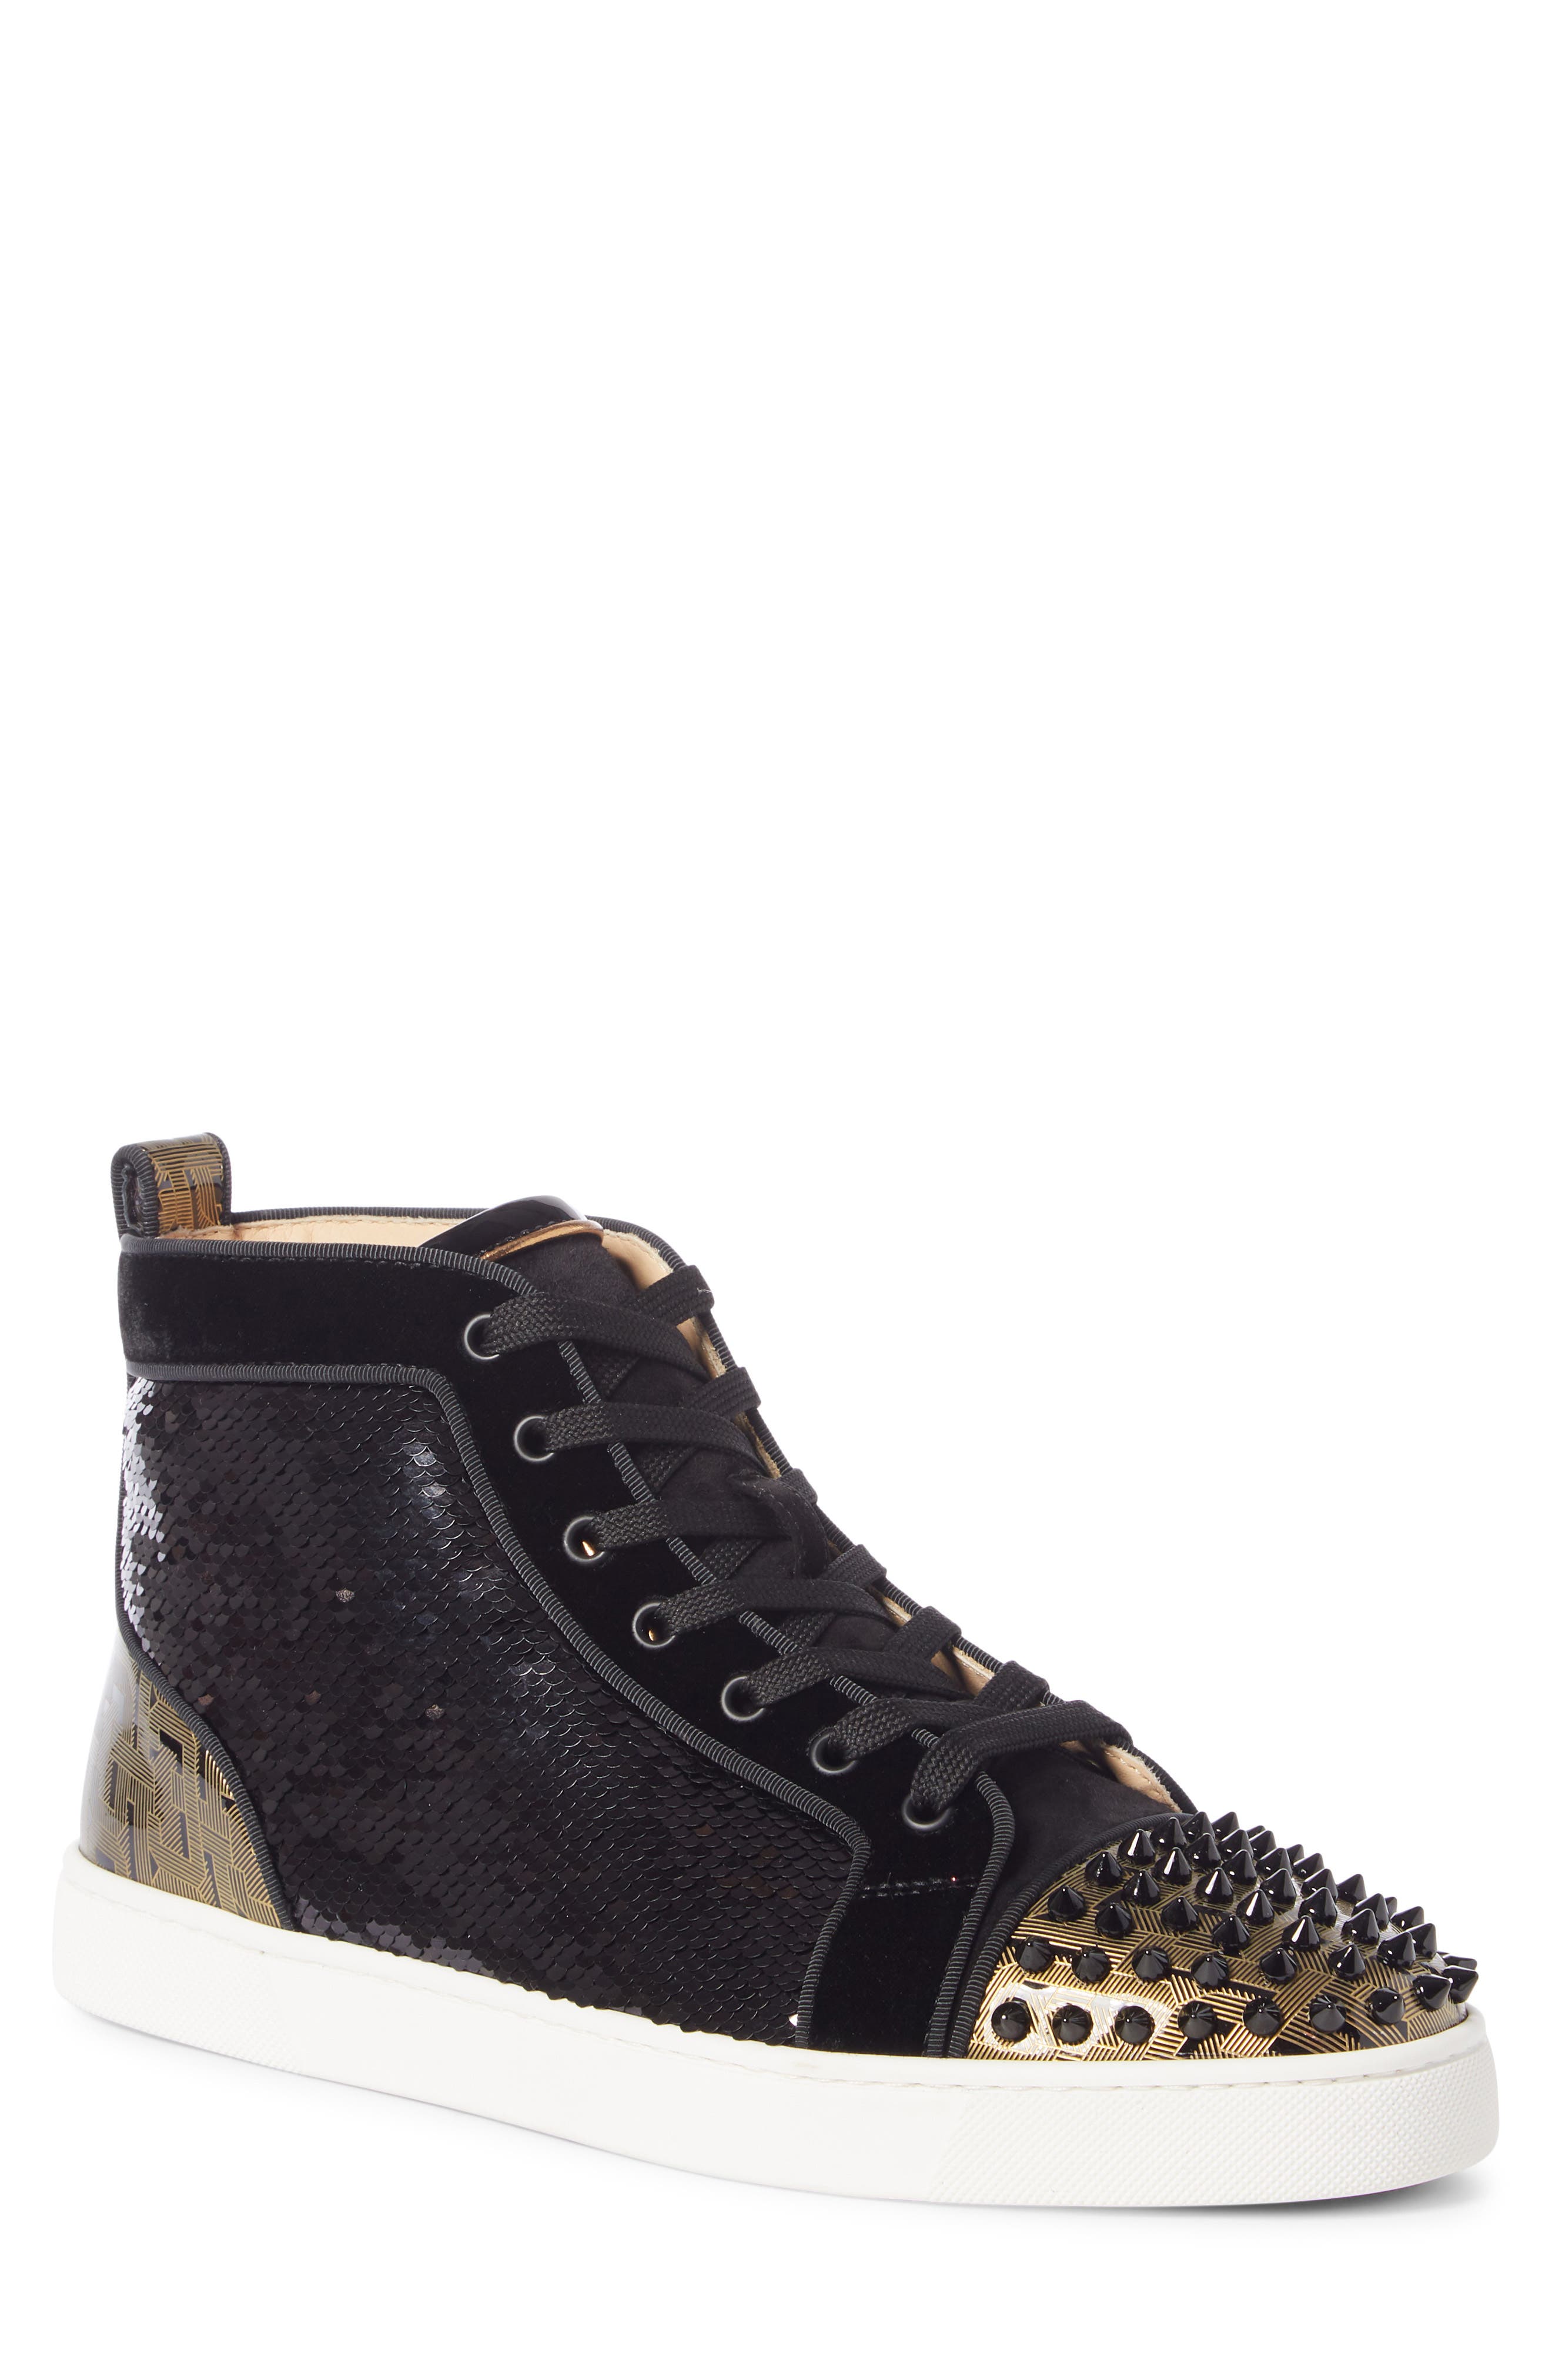 christian louboutin spiked shoes for men